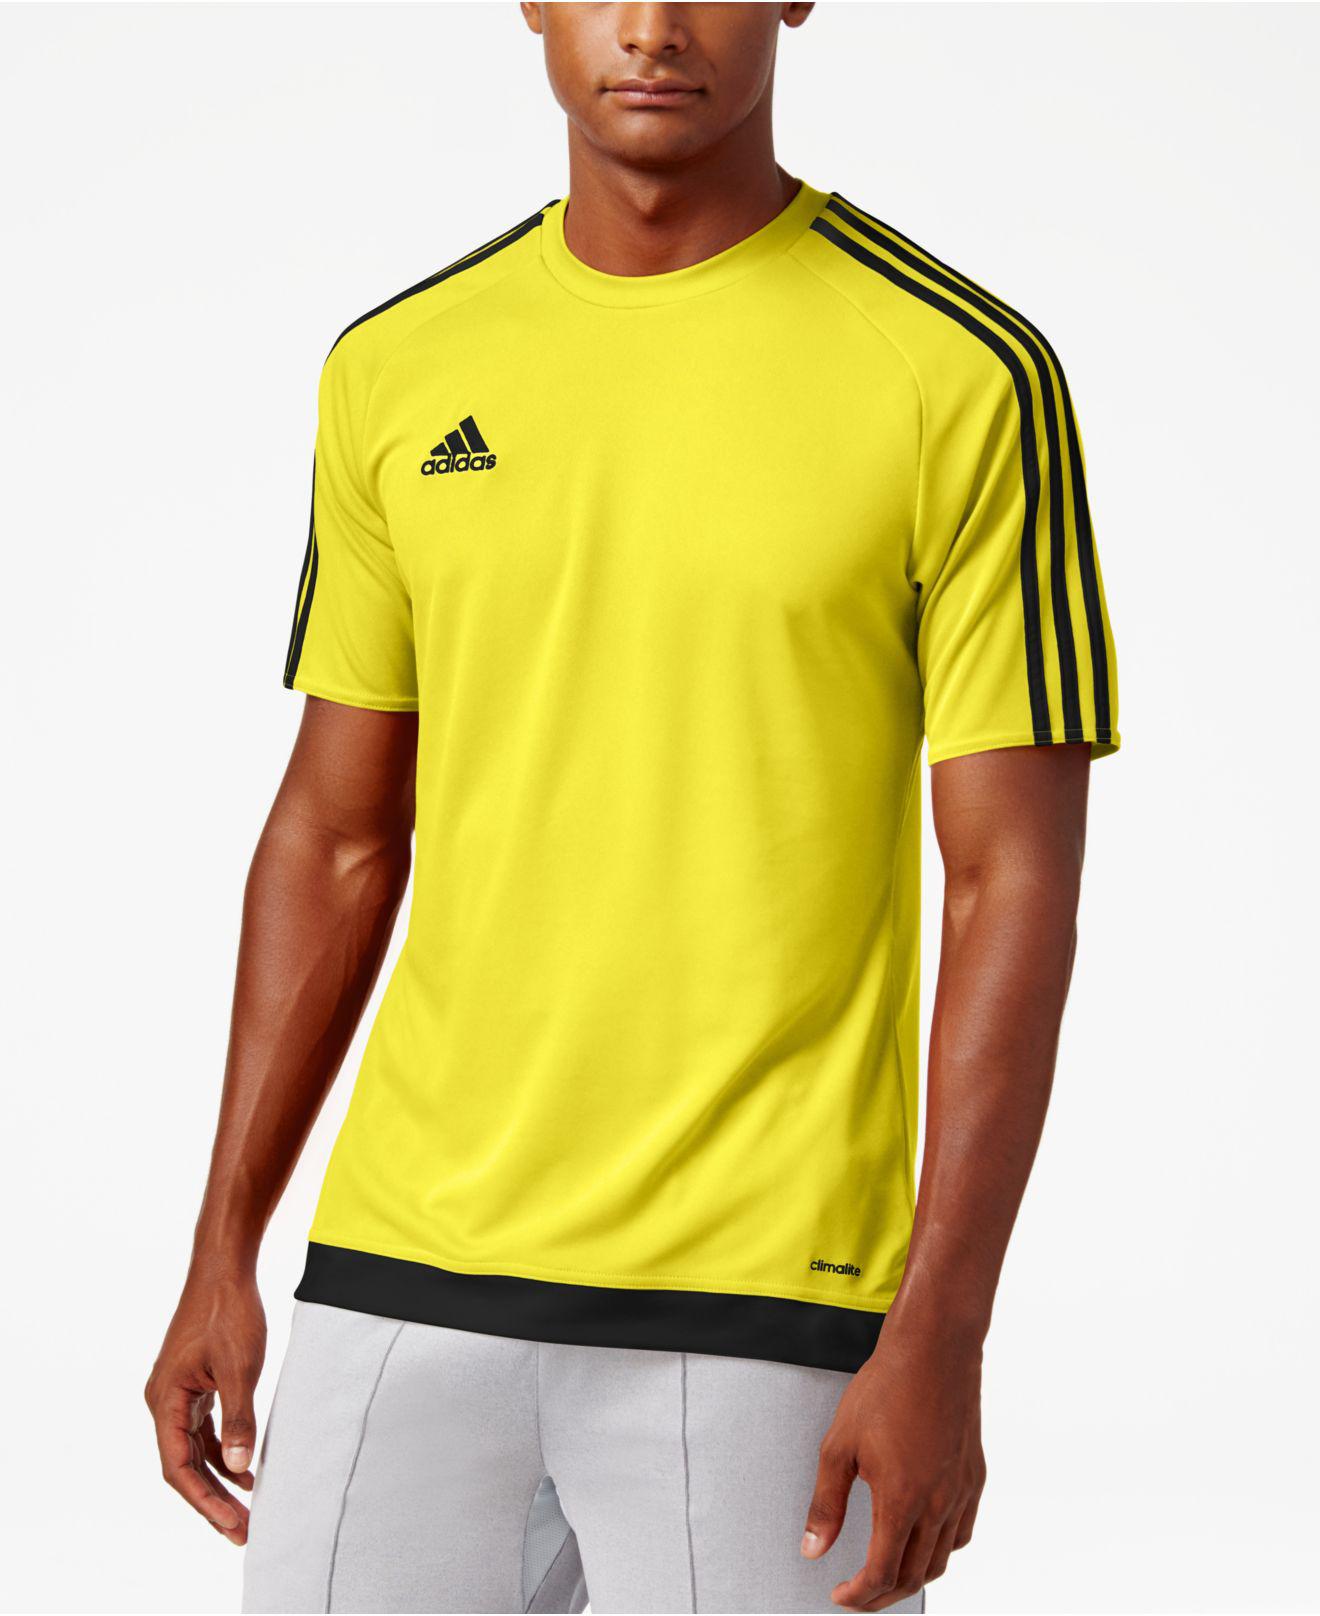 adidas Synthetic Men's Short-sleeve Soccer Jersey in Yellow/Black ...